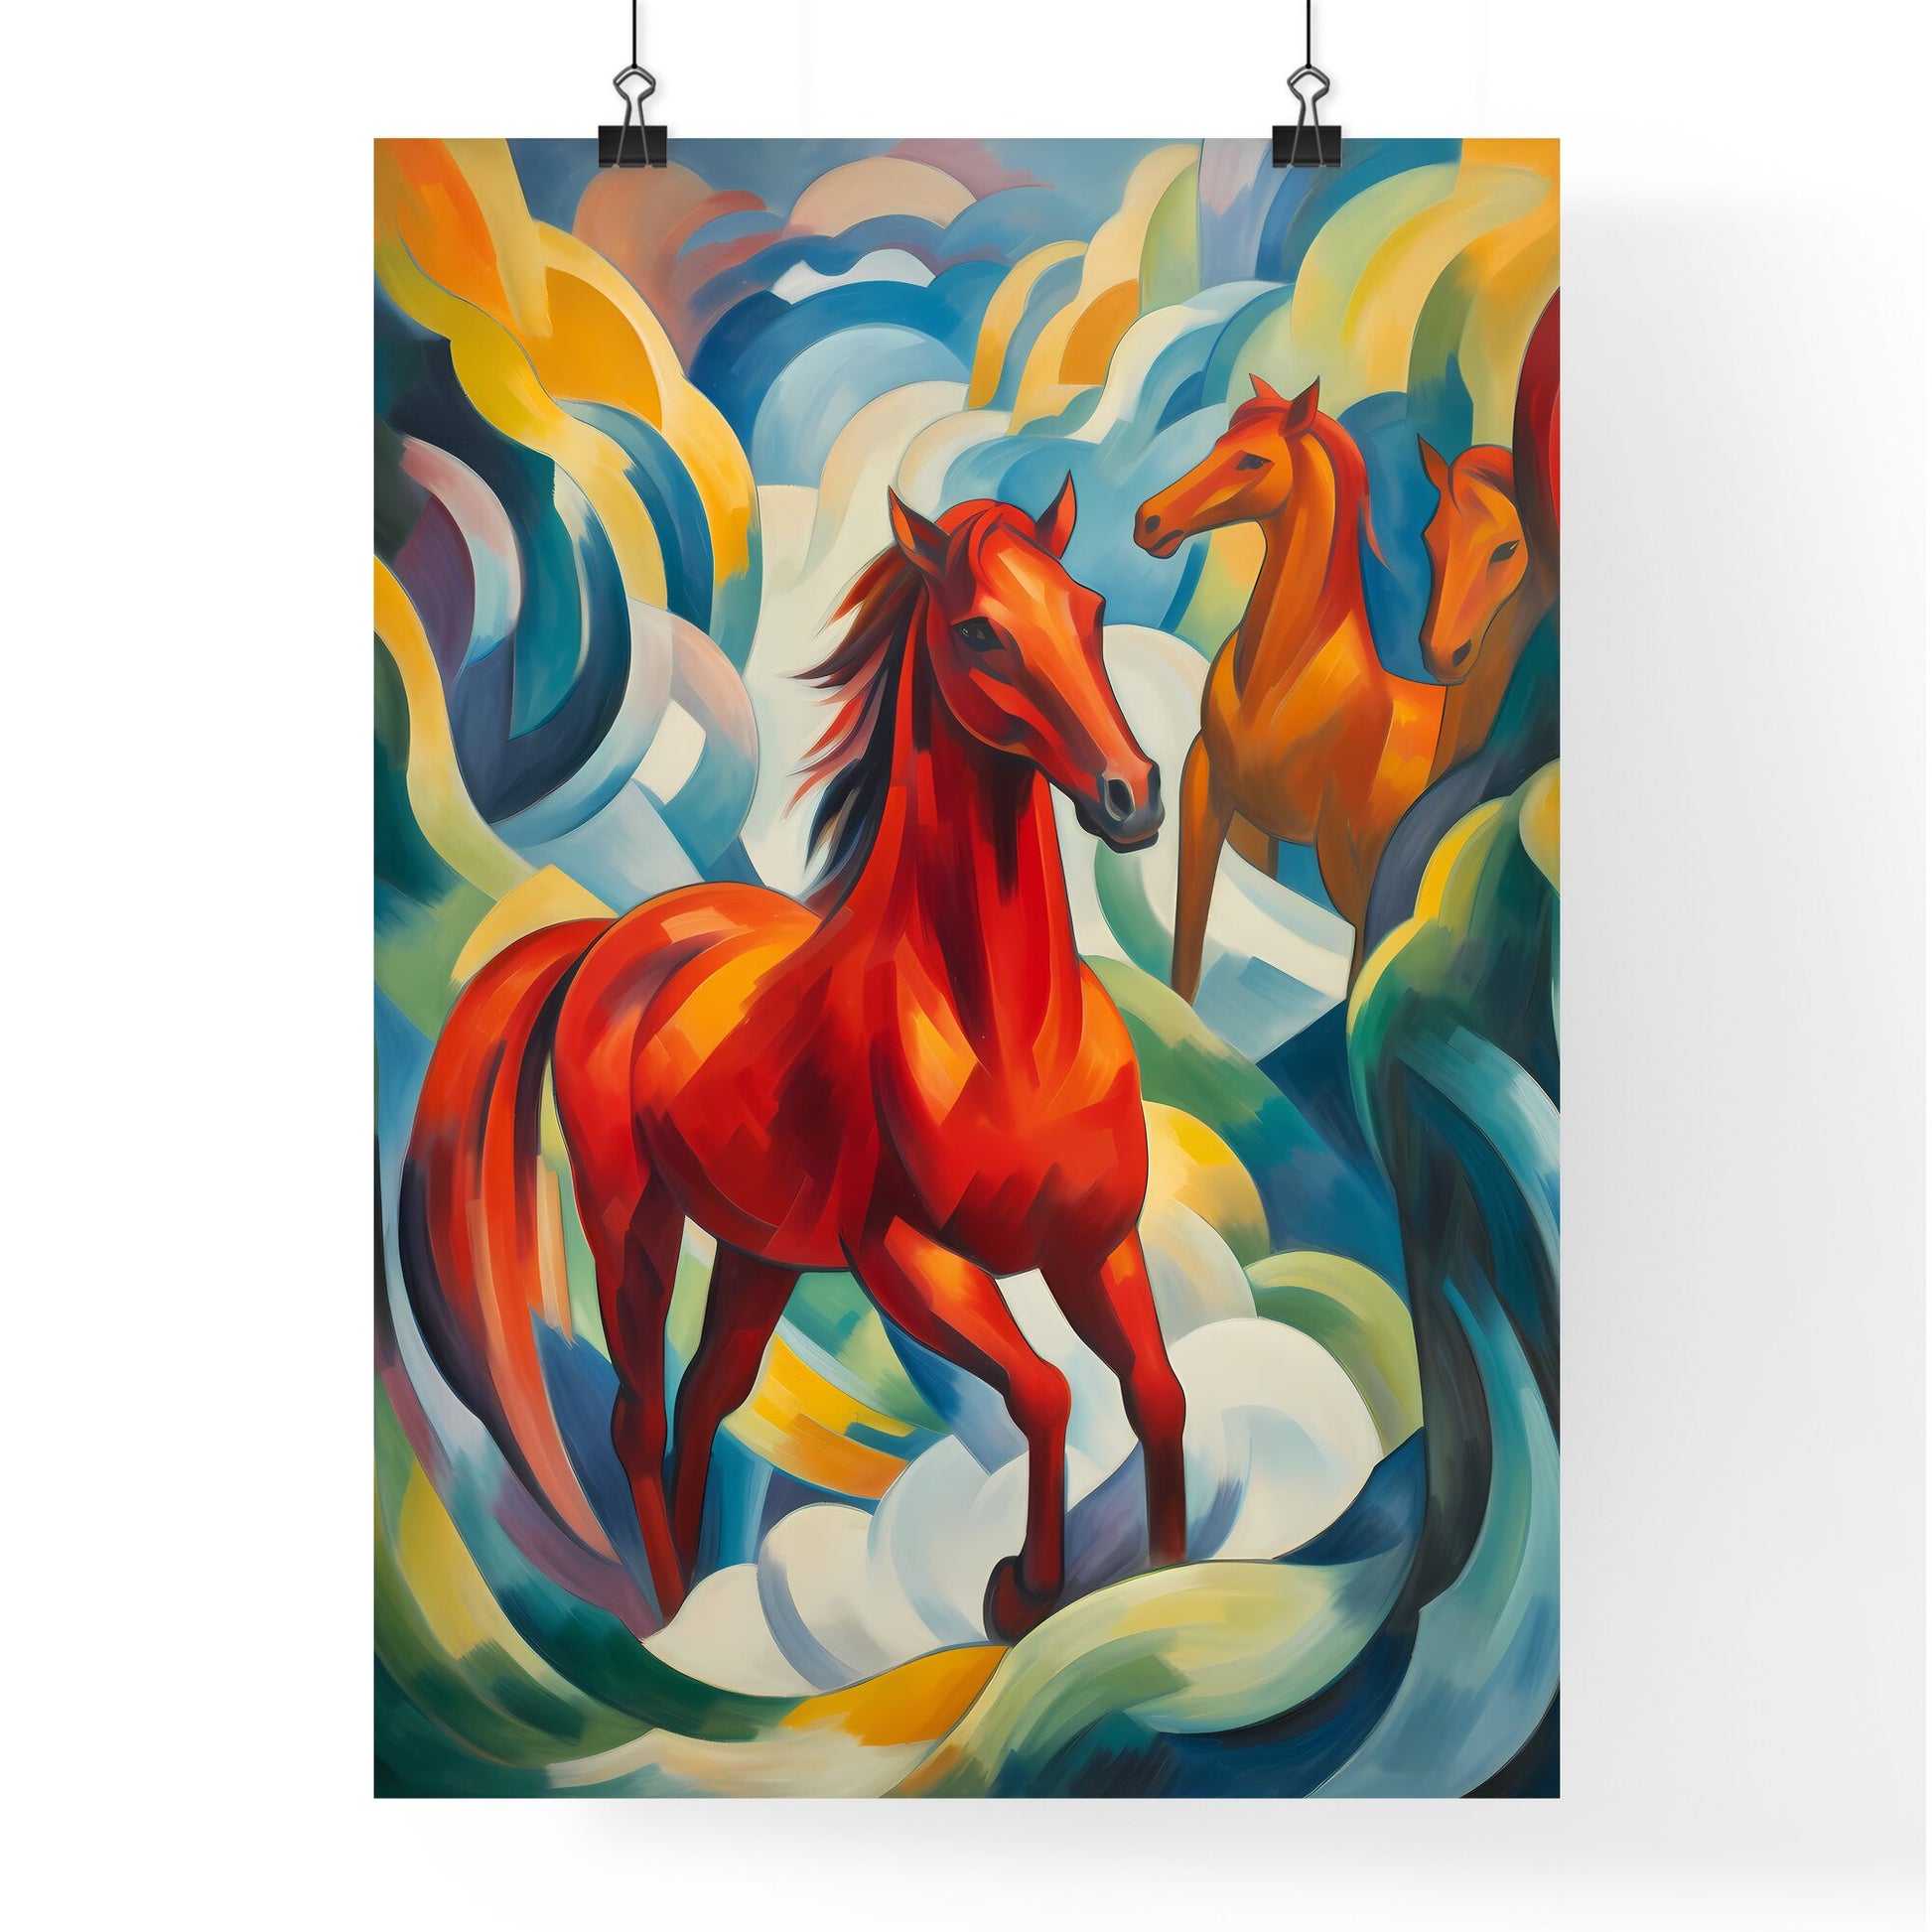 A Poster of if Franz Marc was a photographer - A Painting Of Horses In A Colorful Landscape Default Title